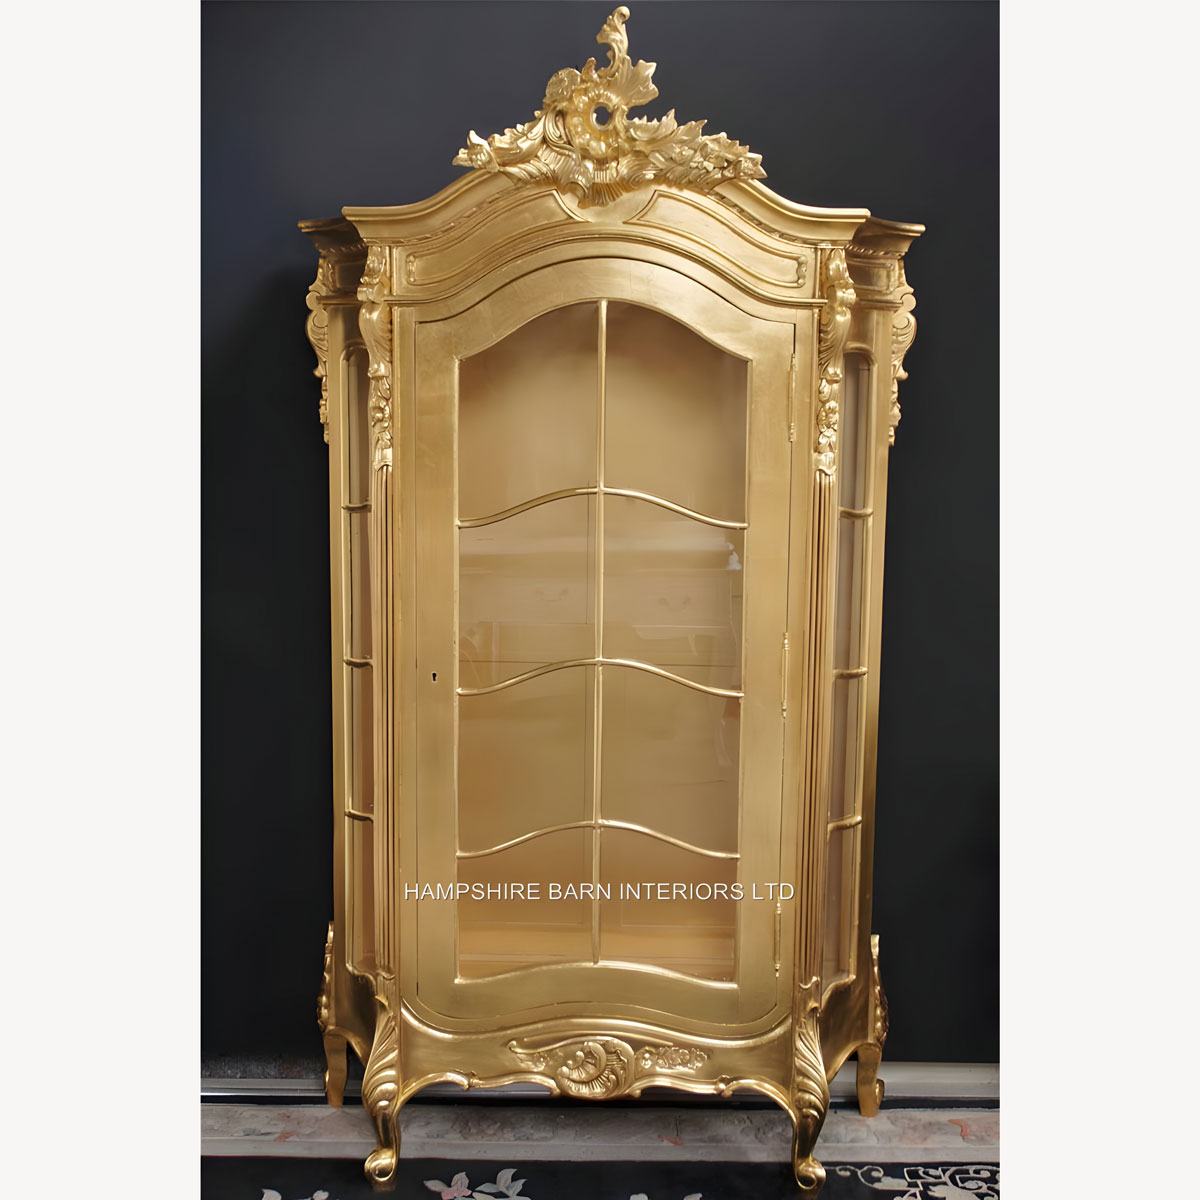 Ornate French Louis Style Carved Silver Leaf Display Cabinet Also In Antiqued Gold Leaf 2 - Hampshire Barn Interiors - Ornate French Louis Style Carved Silver Leaf Display Cabinet Also In Antiqued Gold Leaf -